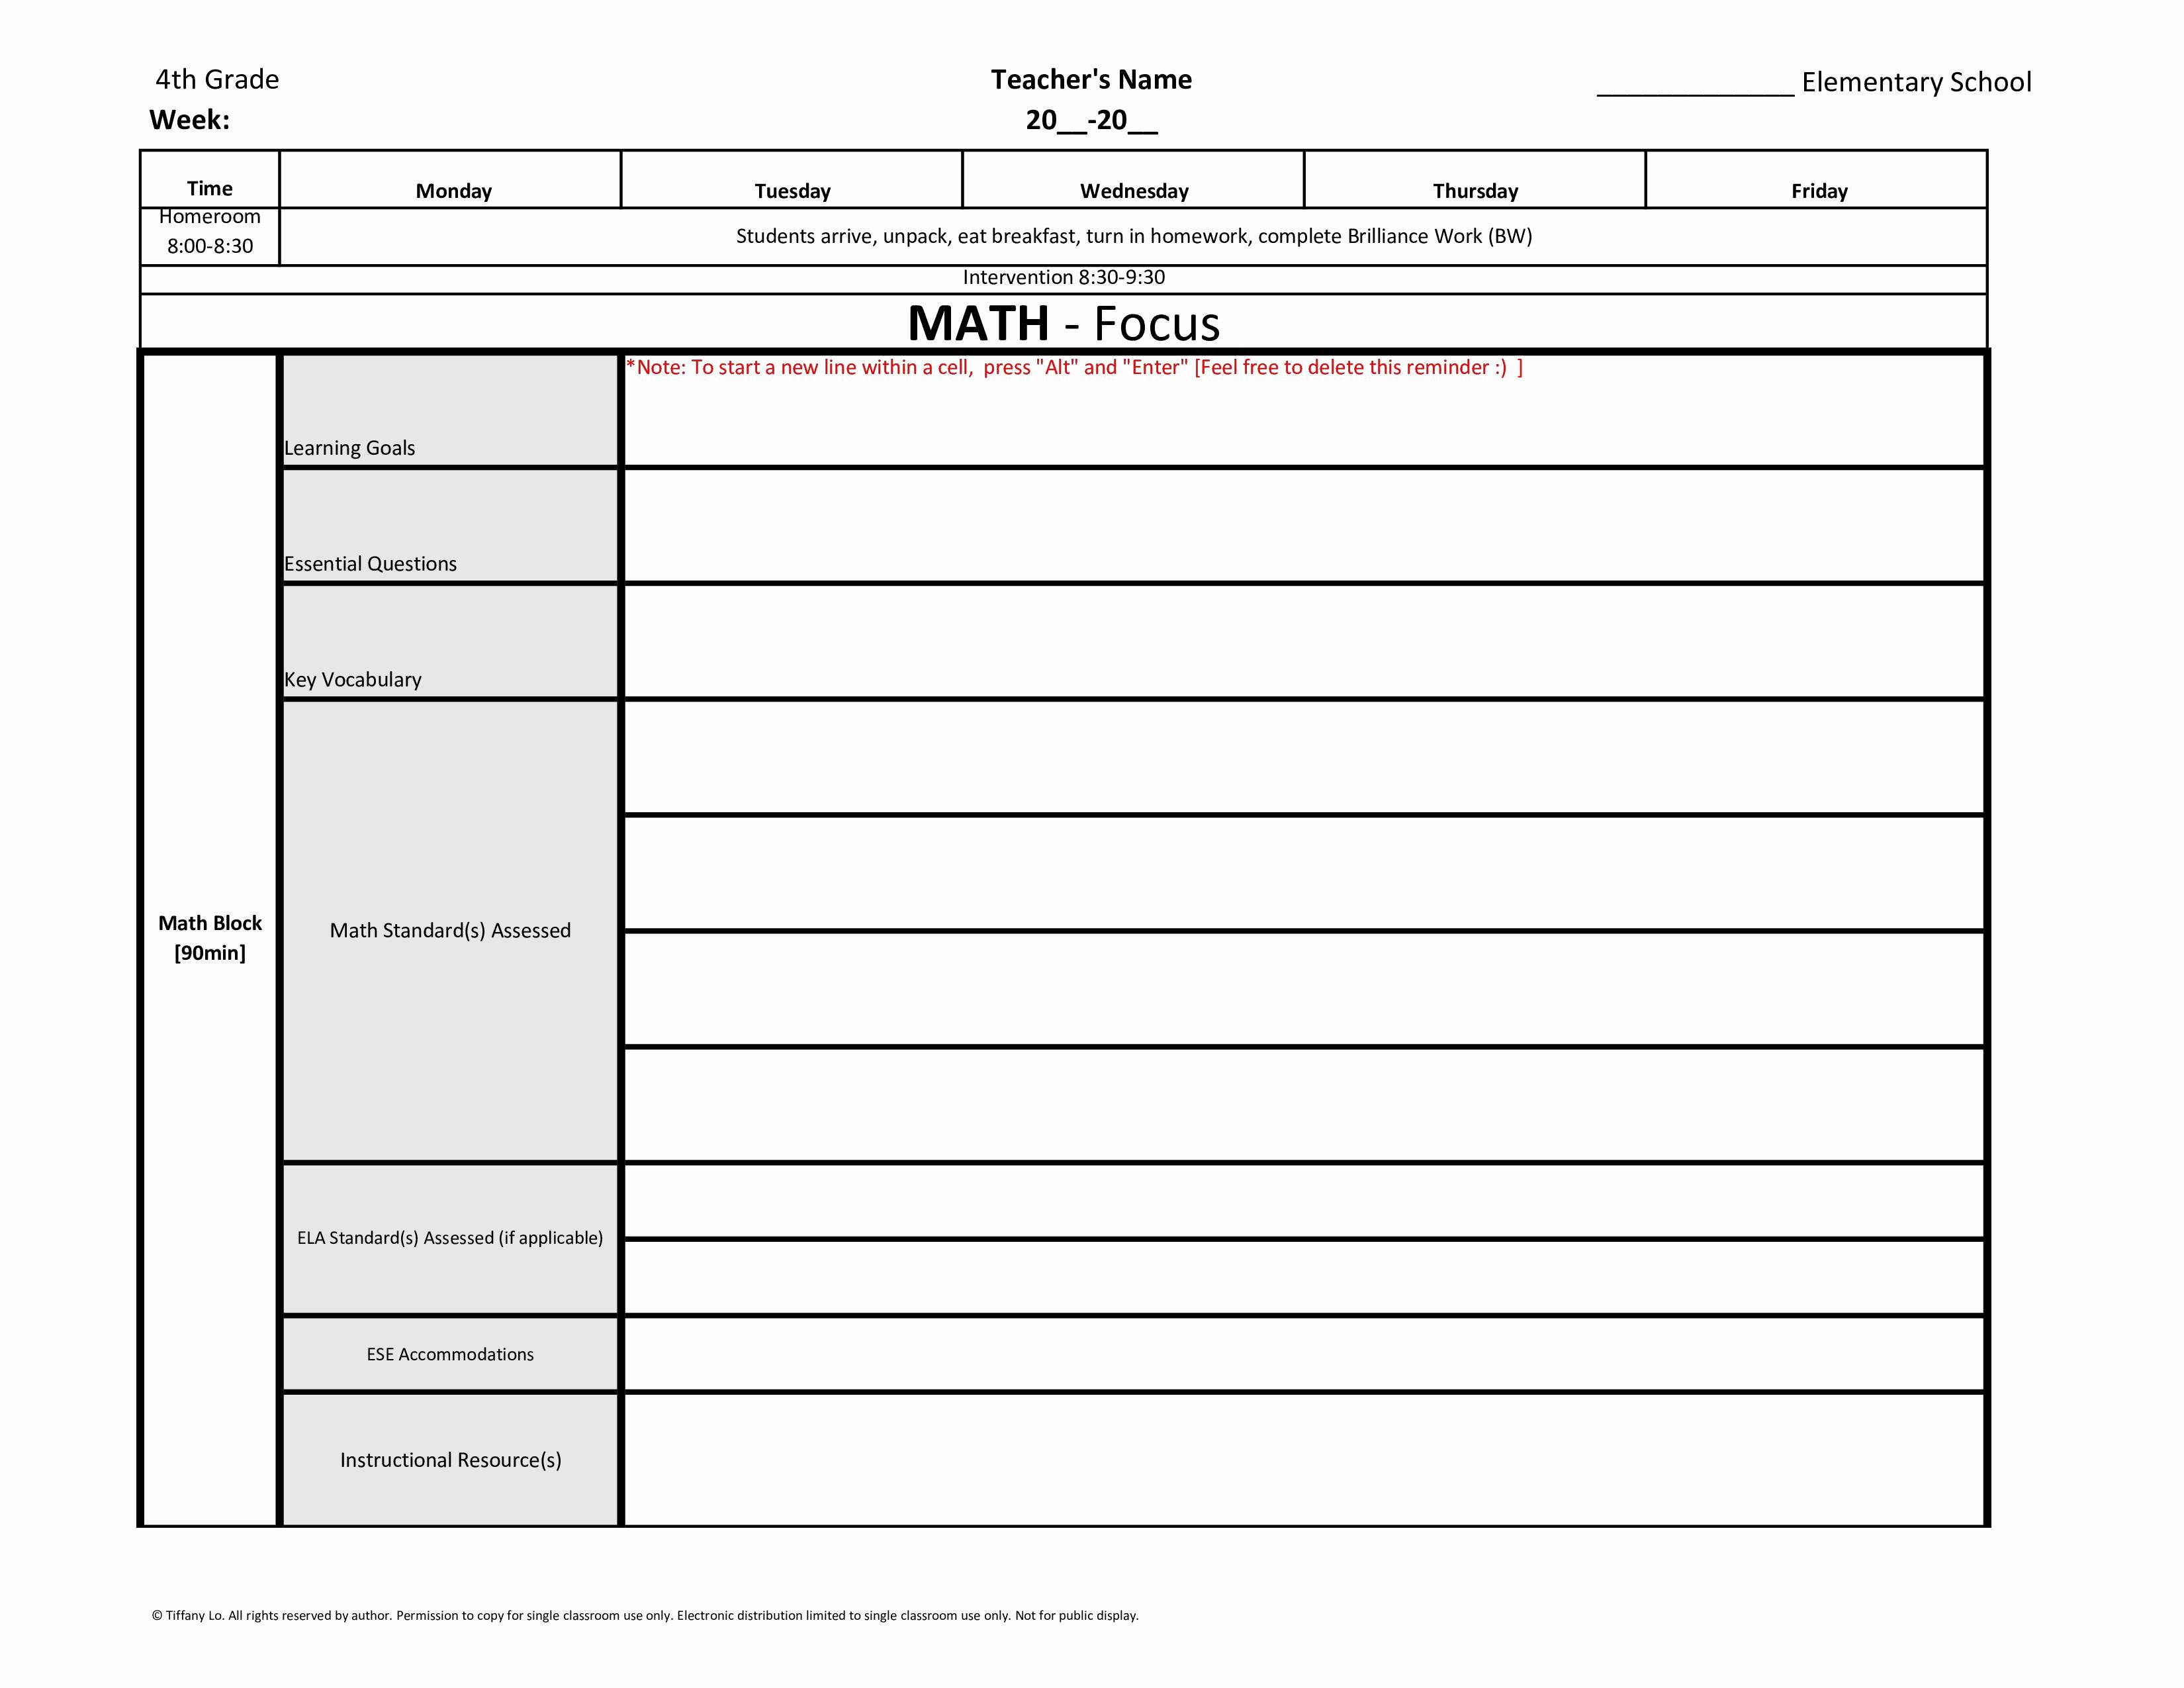 4th Grade Lesson Plan Template Luxury 4th Fourth Grade Mon Core Weekly Lesson Plan Template W